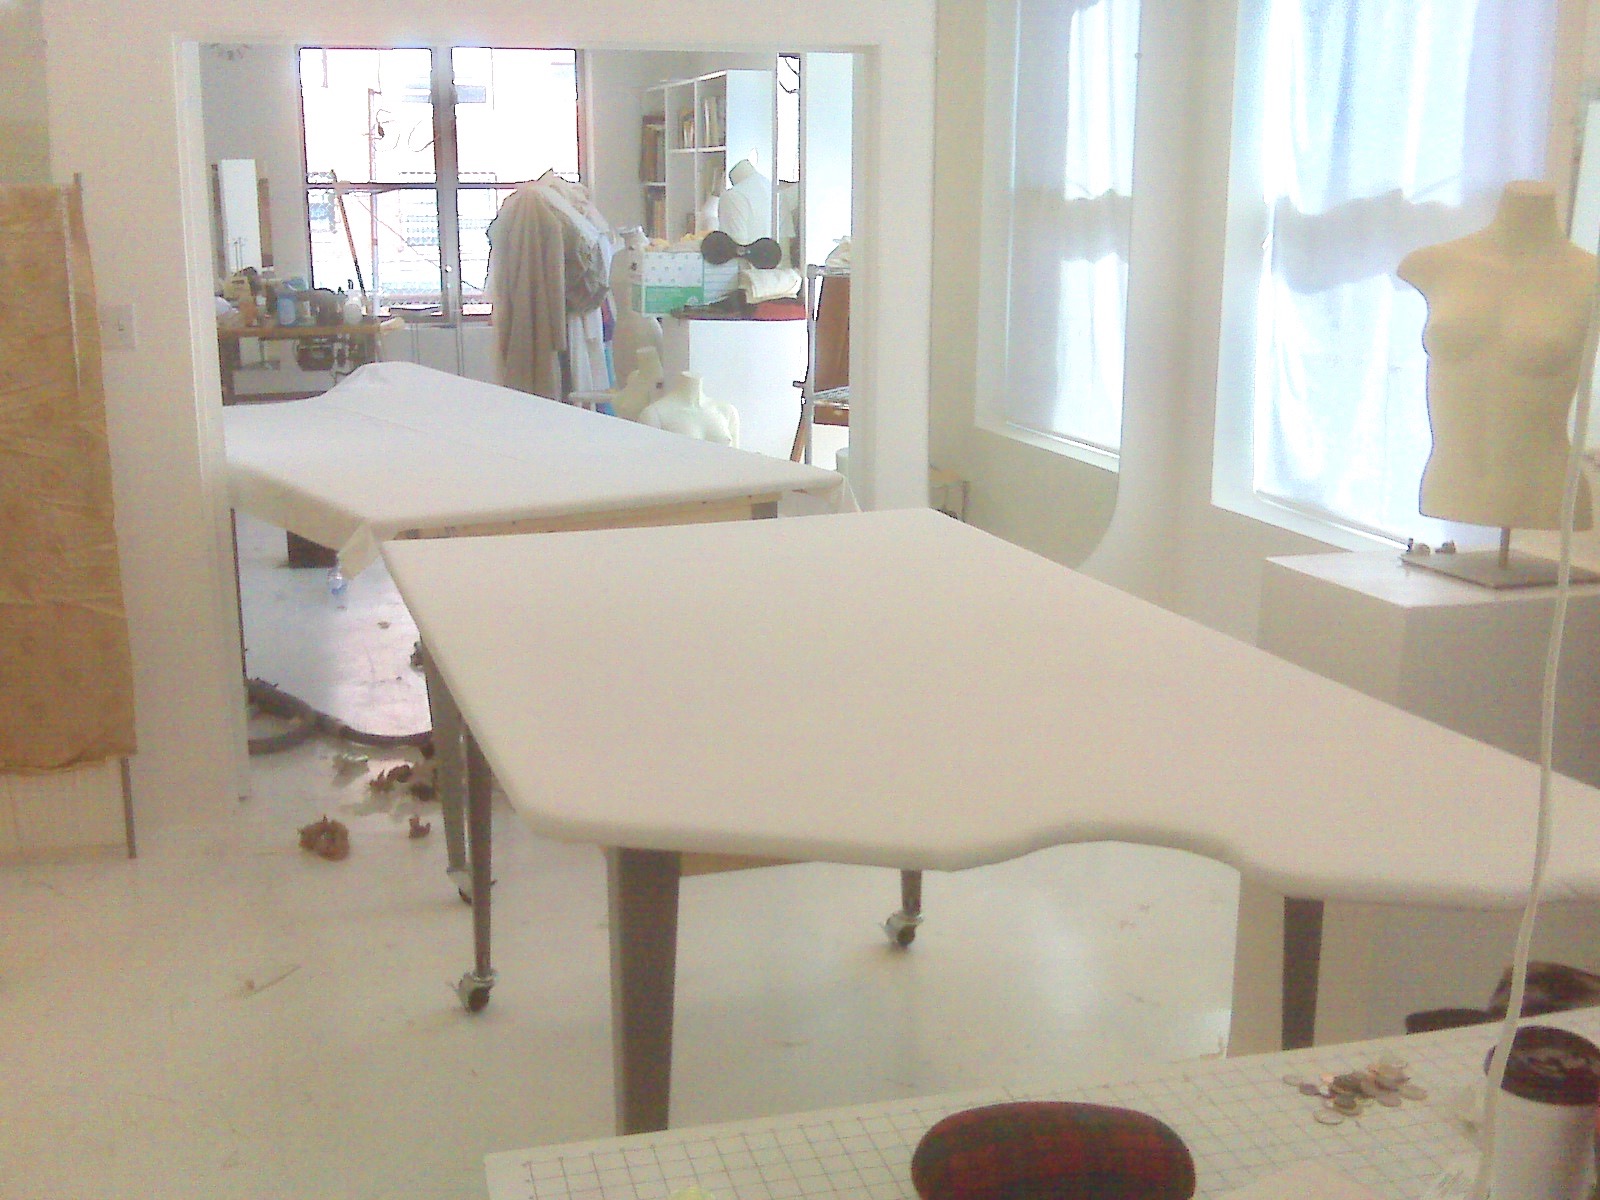 Sewing classes in chicago: Tchad: workroom: Ironing table: finished tables